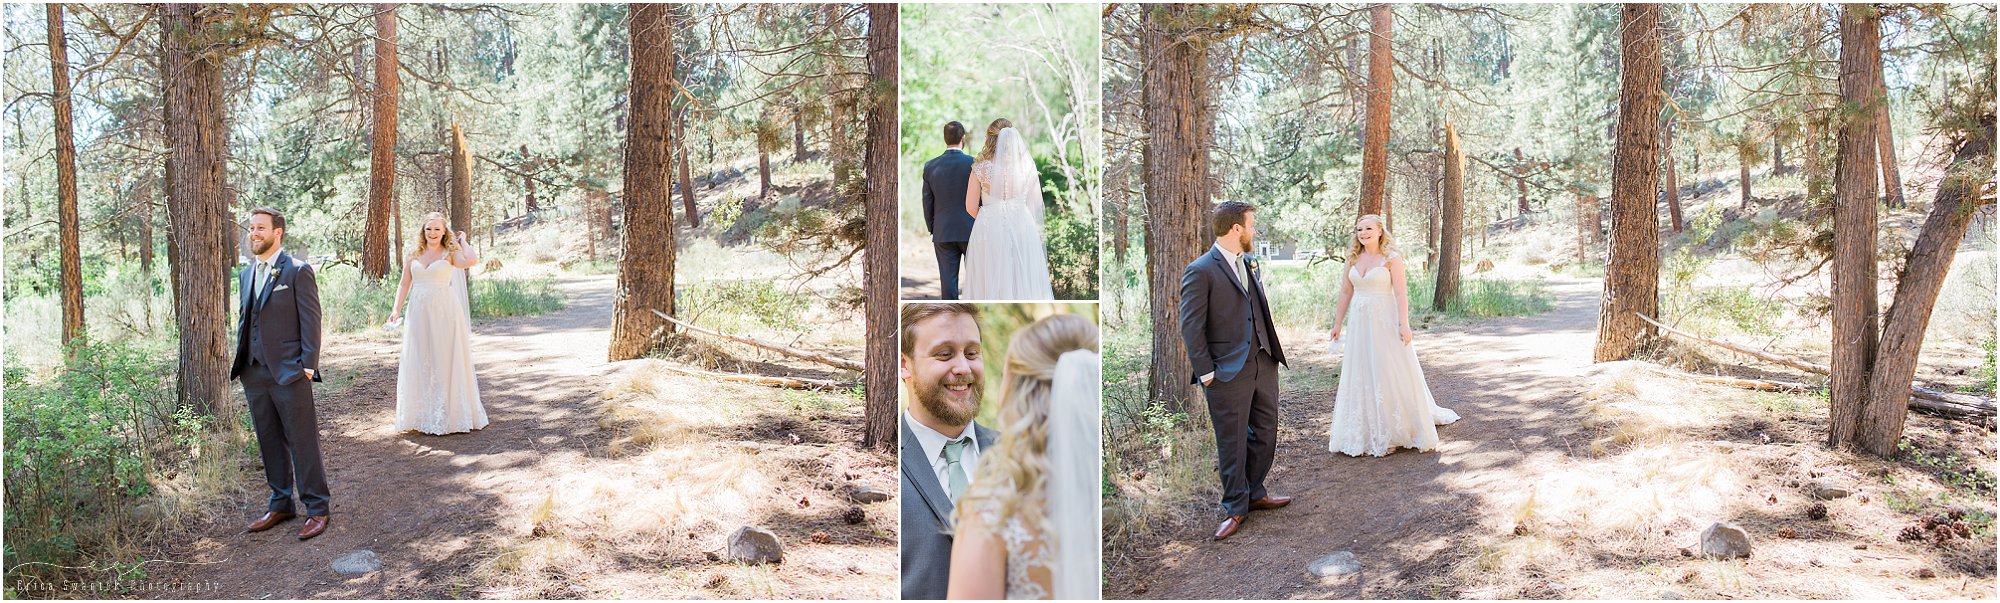 A first look at this vintage rustic chic Bend wedding at Aspen Hall. | Erica Swantek Photography